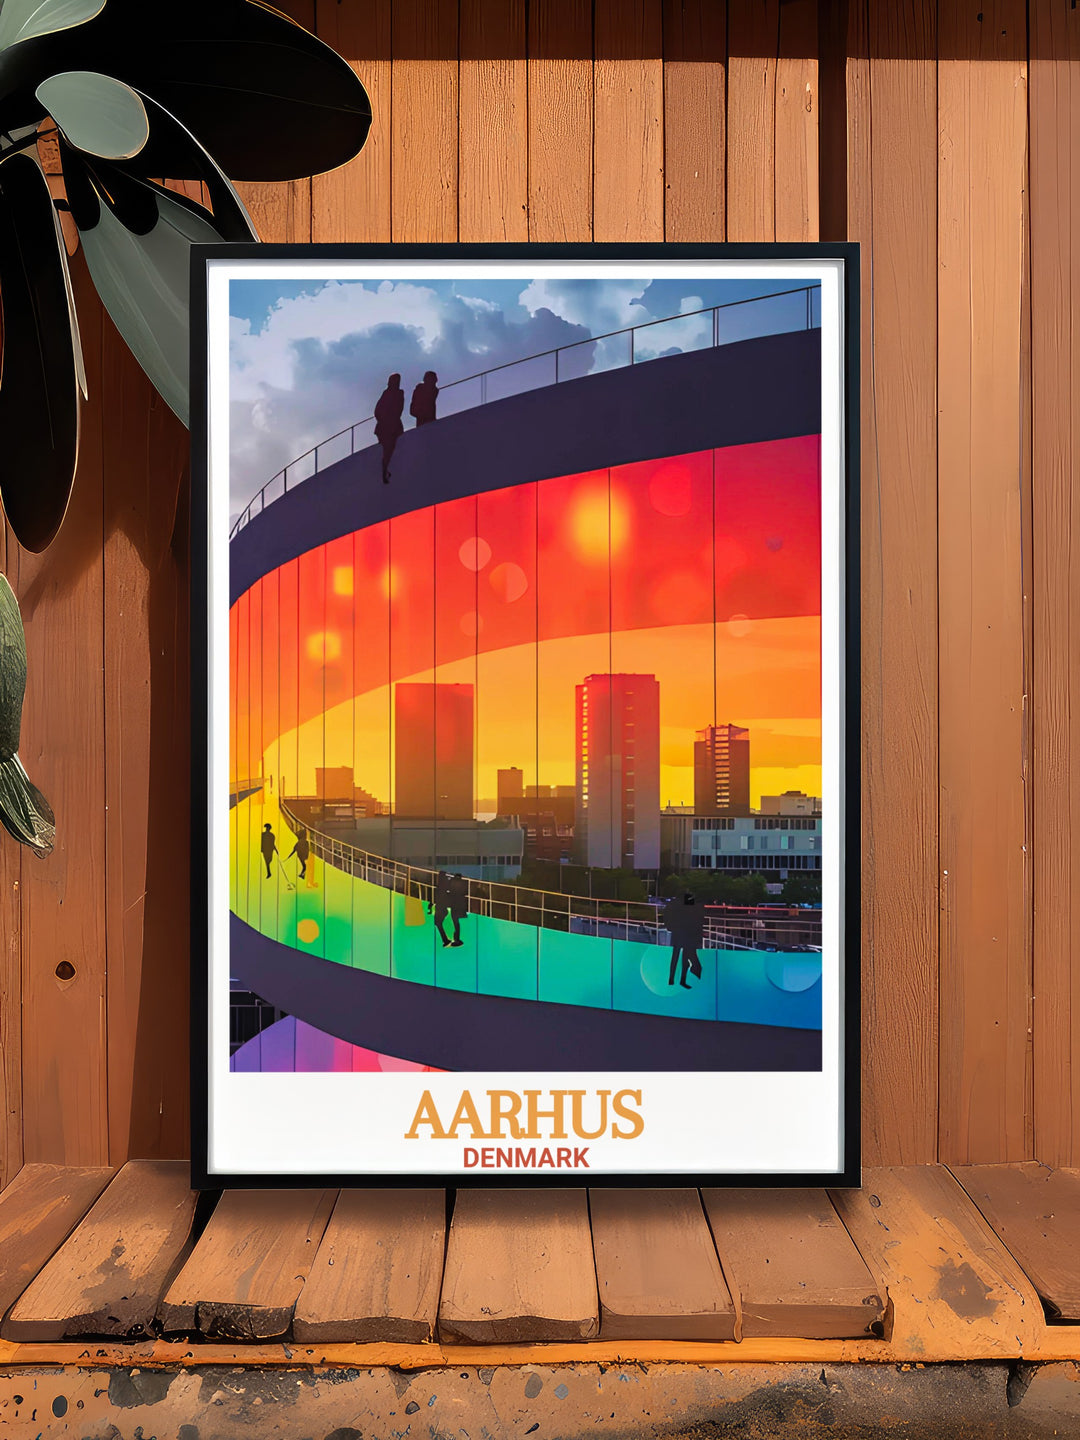 Bring home the charm of Aarhus with ARoS Aarhus Art Museum photo prints. Perfect for Denmark wall art lovers these prints capture the unique style and captivating exhibits of Aarhus renowned art museum.